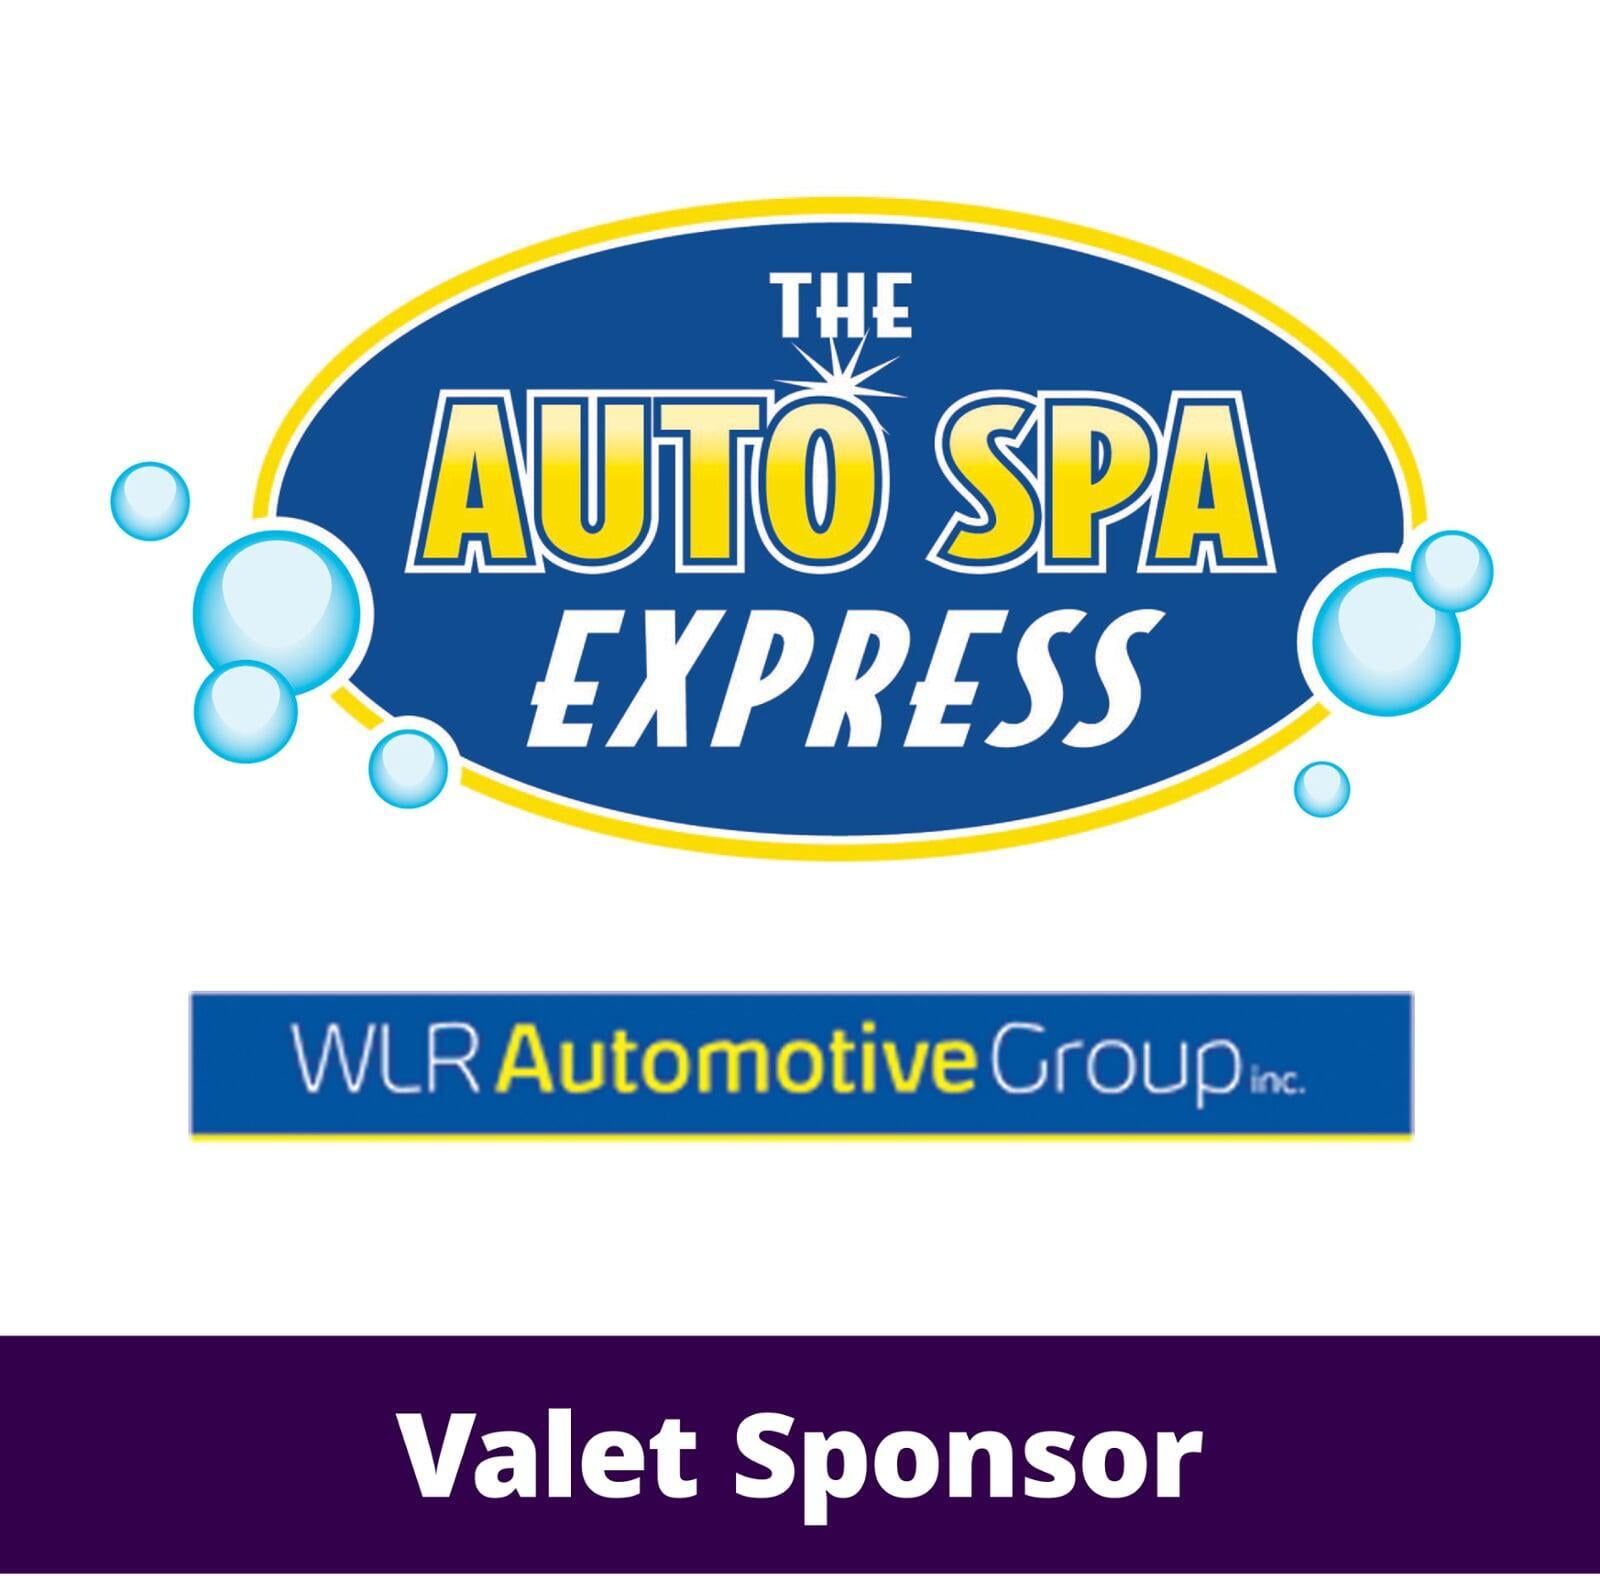 The Auto Spa Express and WLR Automotive Group Inc. logos